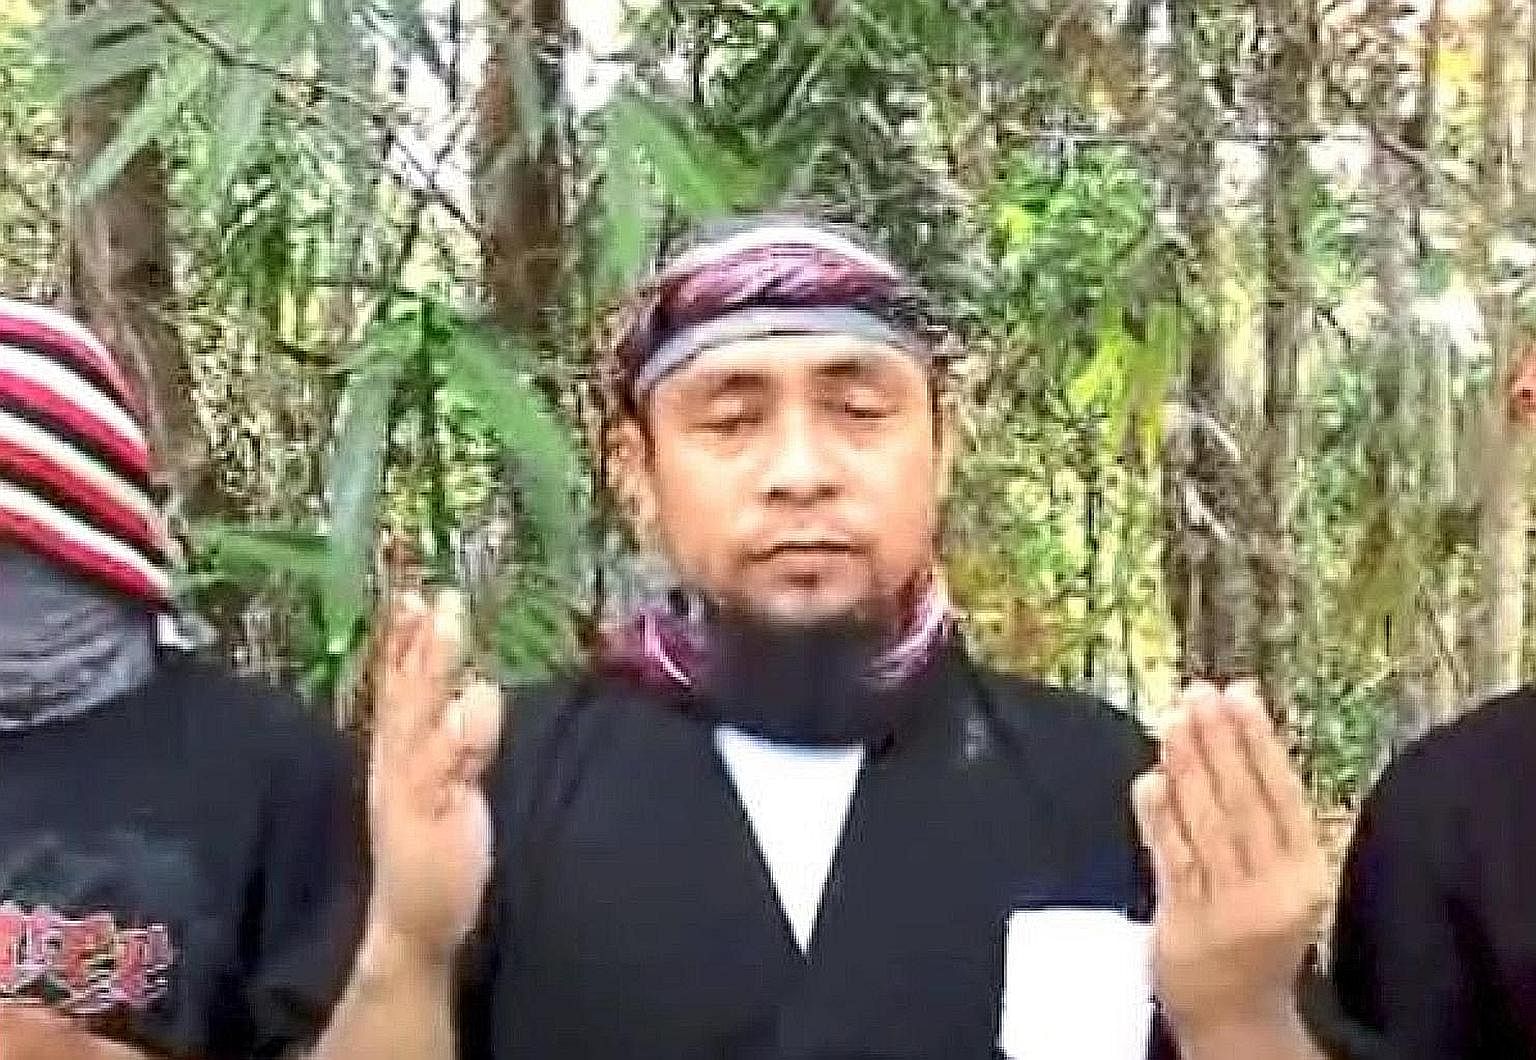 Abu Sayyaf chief Isnilon Hapilon was designated by ISIS as its top man in South-east Asia last year.